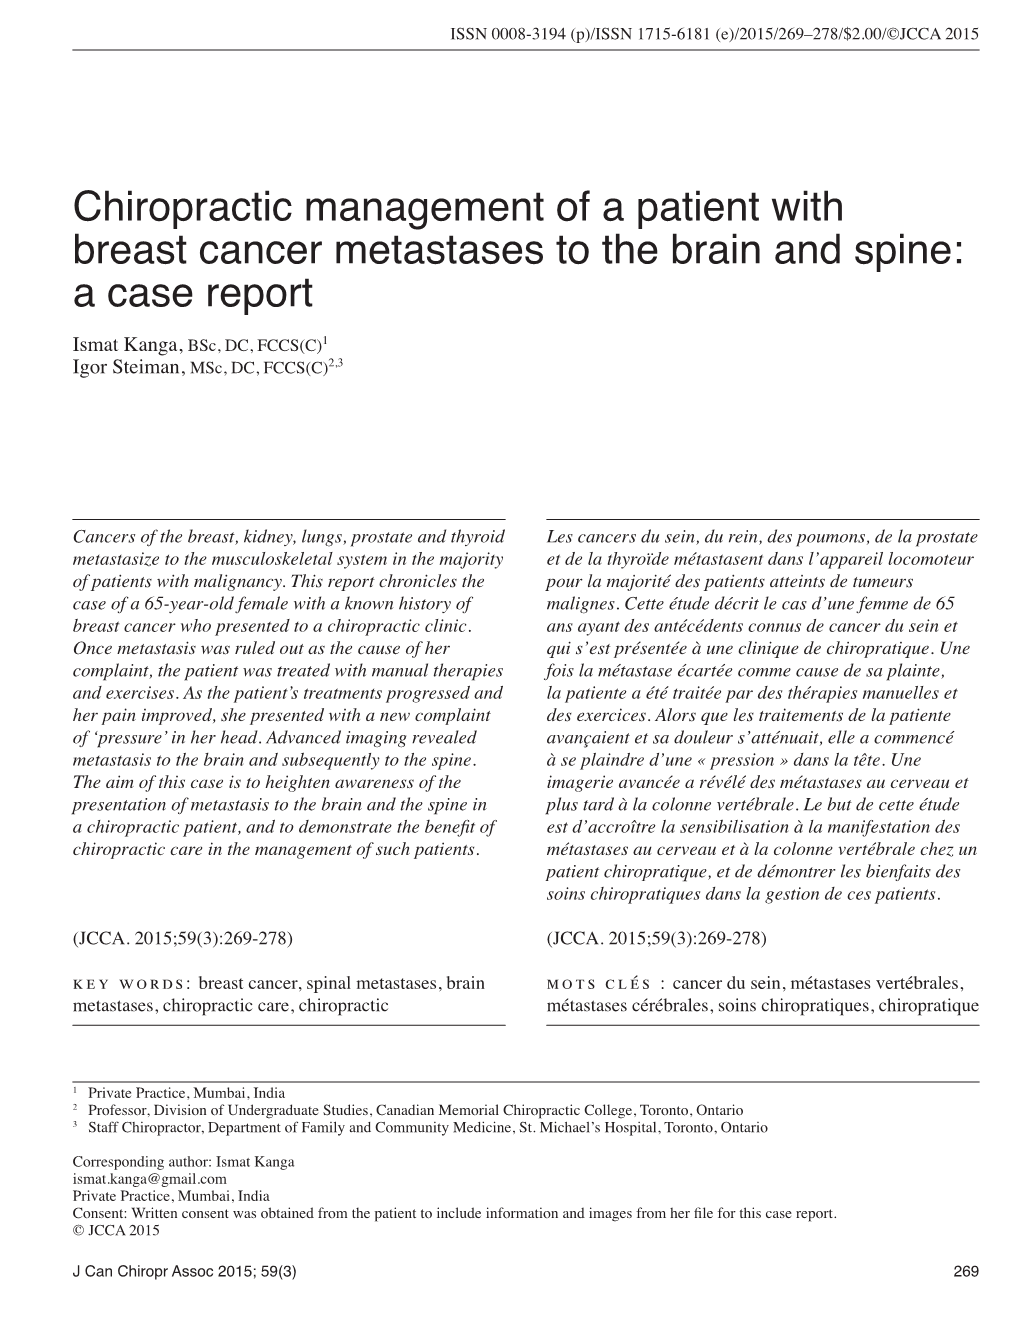 Chiropractic Management of a Patient with Breast Cancer Metastases To